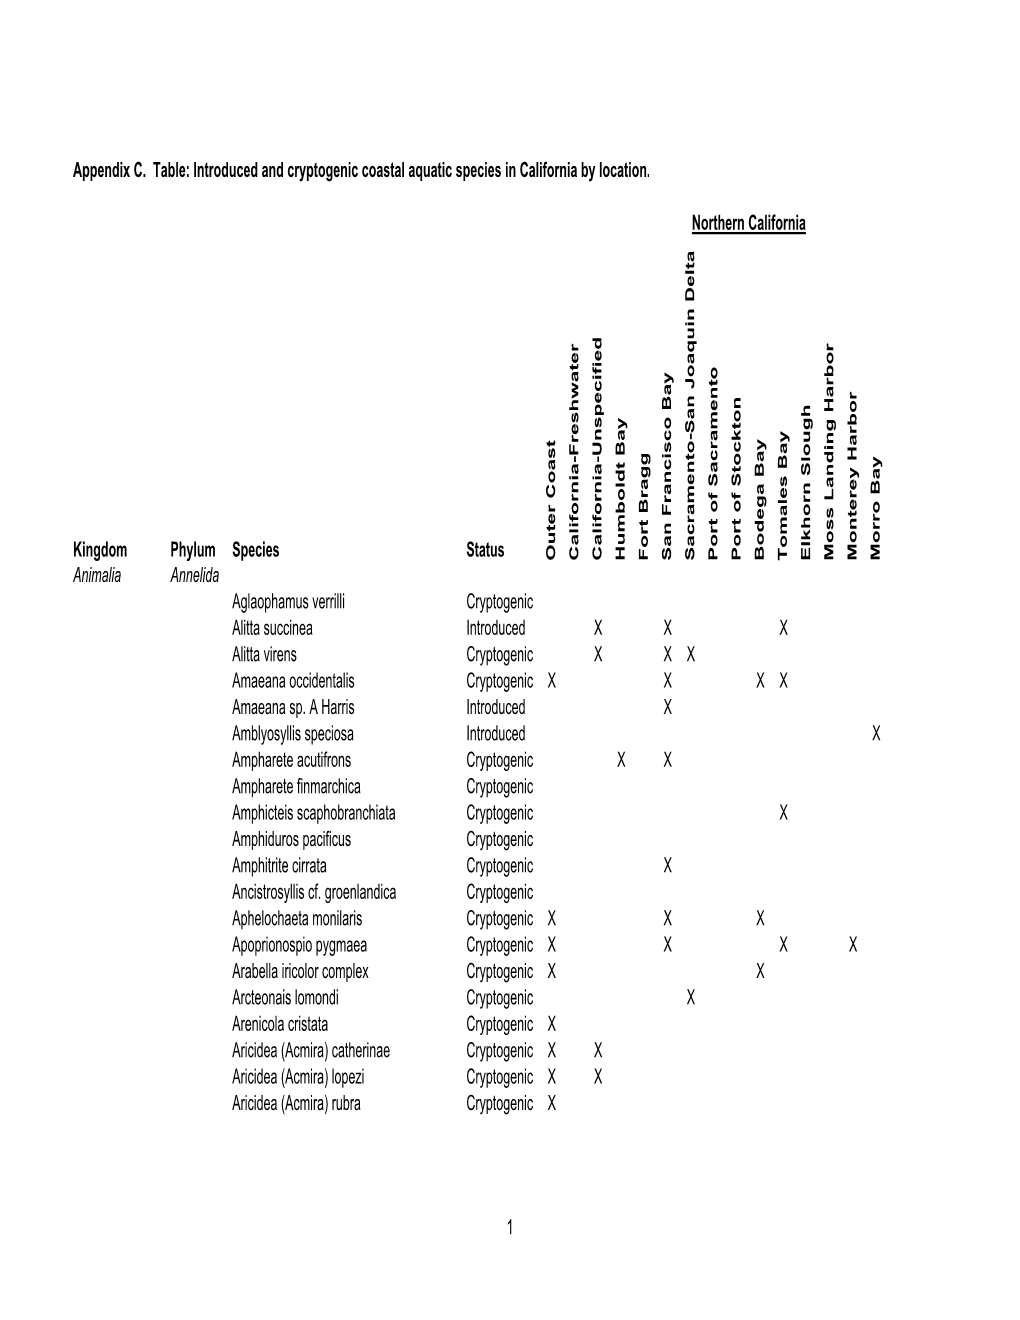 Appendix C. Table: Introduced and Cryptogenic Coastal Aquatic Species in California by Location